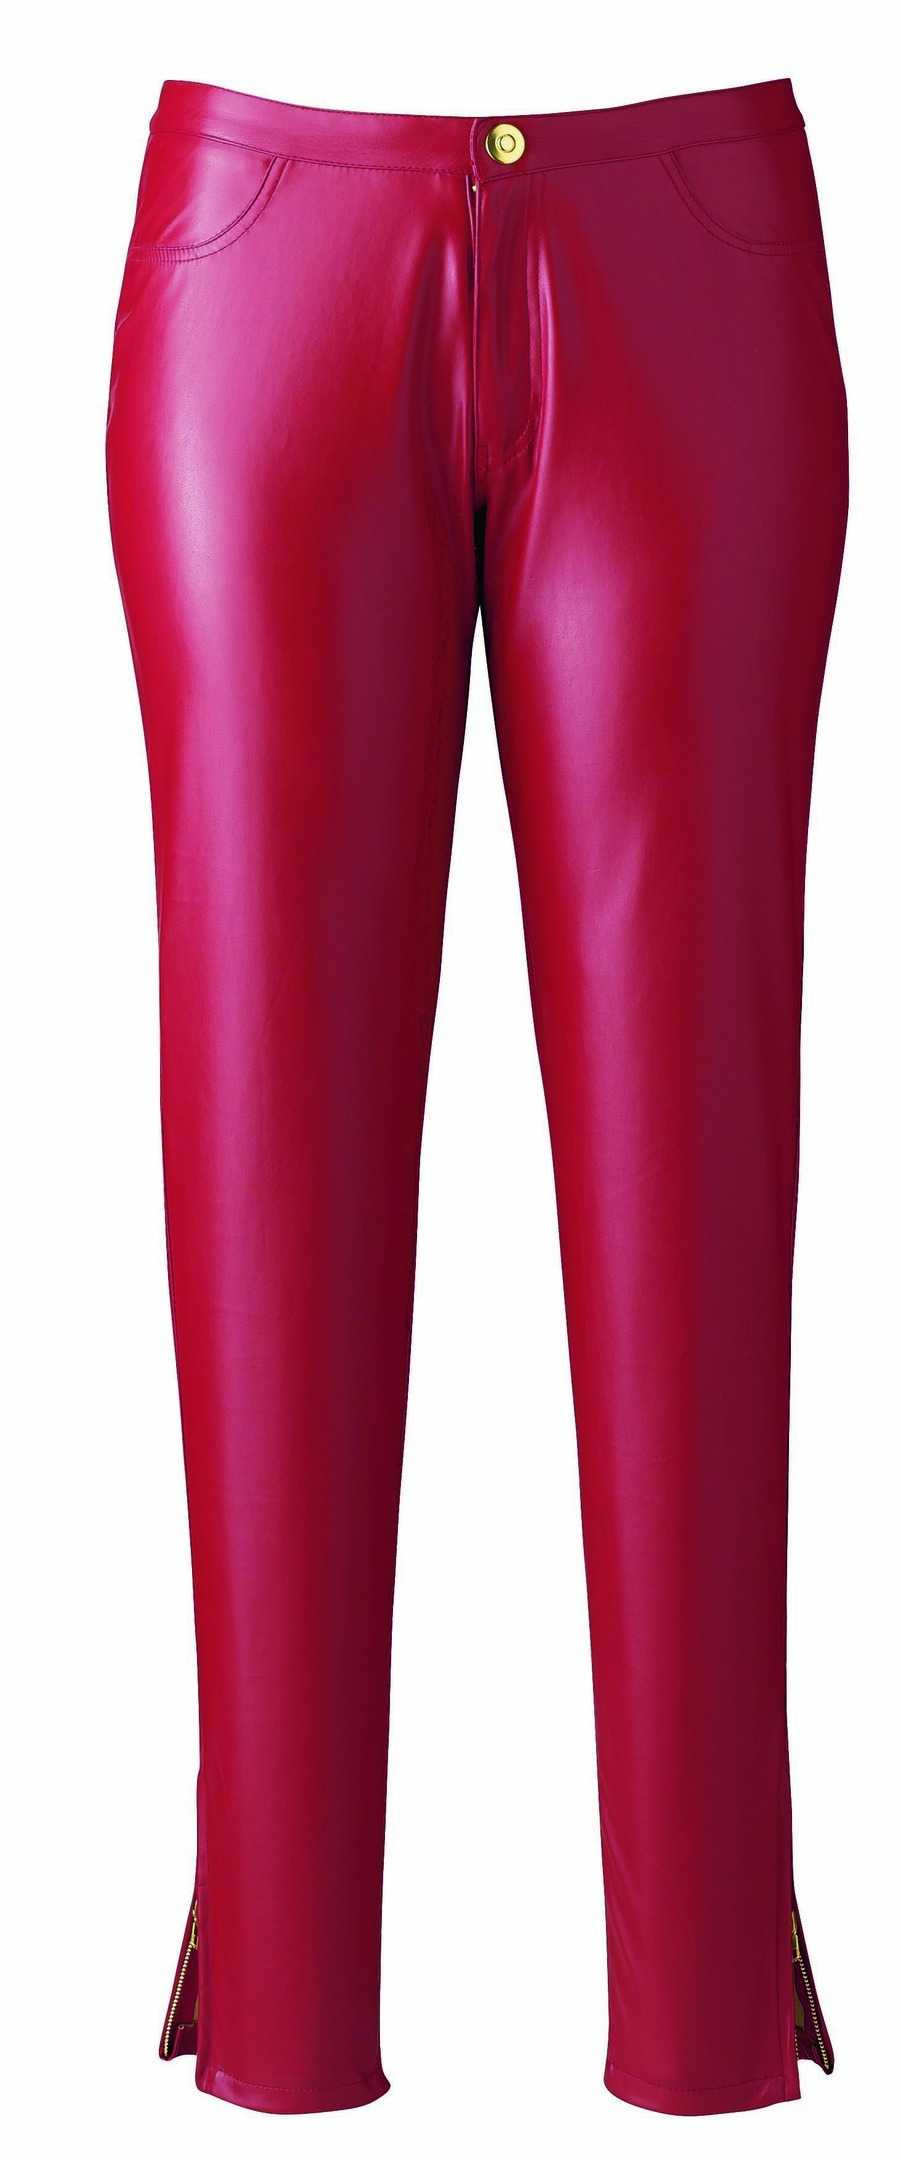 Kelly Brook for Simply Be red PU zip-hem trousers, £50 